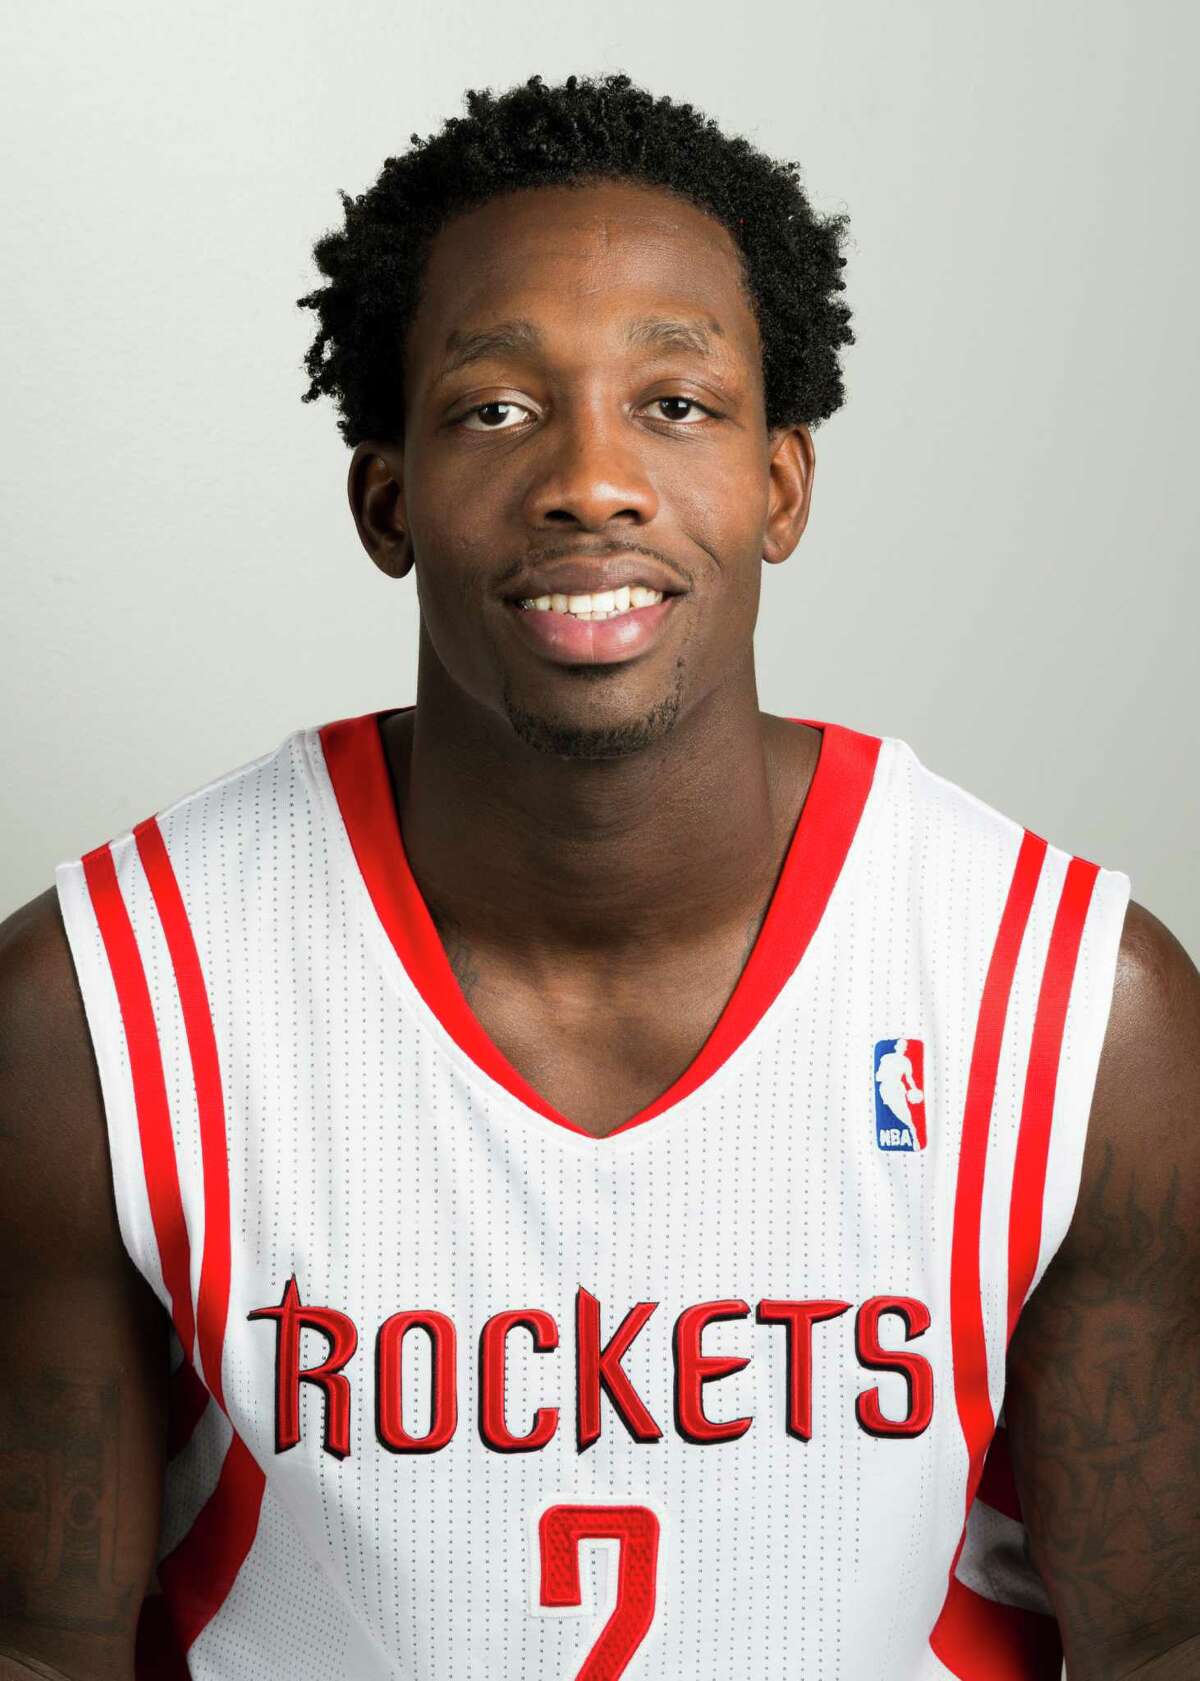 Houston Rockets guard Patrick Beverley during media day at Toyota Center on Friday, Sept. 27, 2013, in Houston. ( Smiley N. Pool / Houston Chronicle )